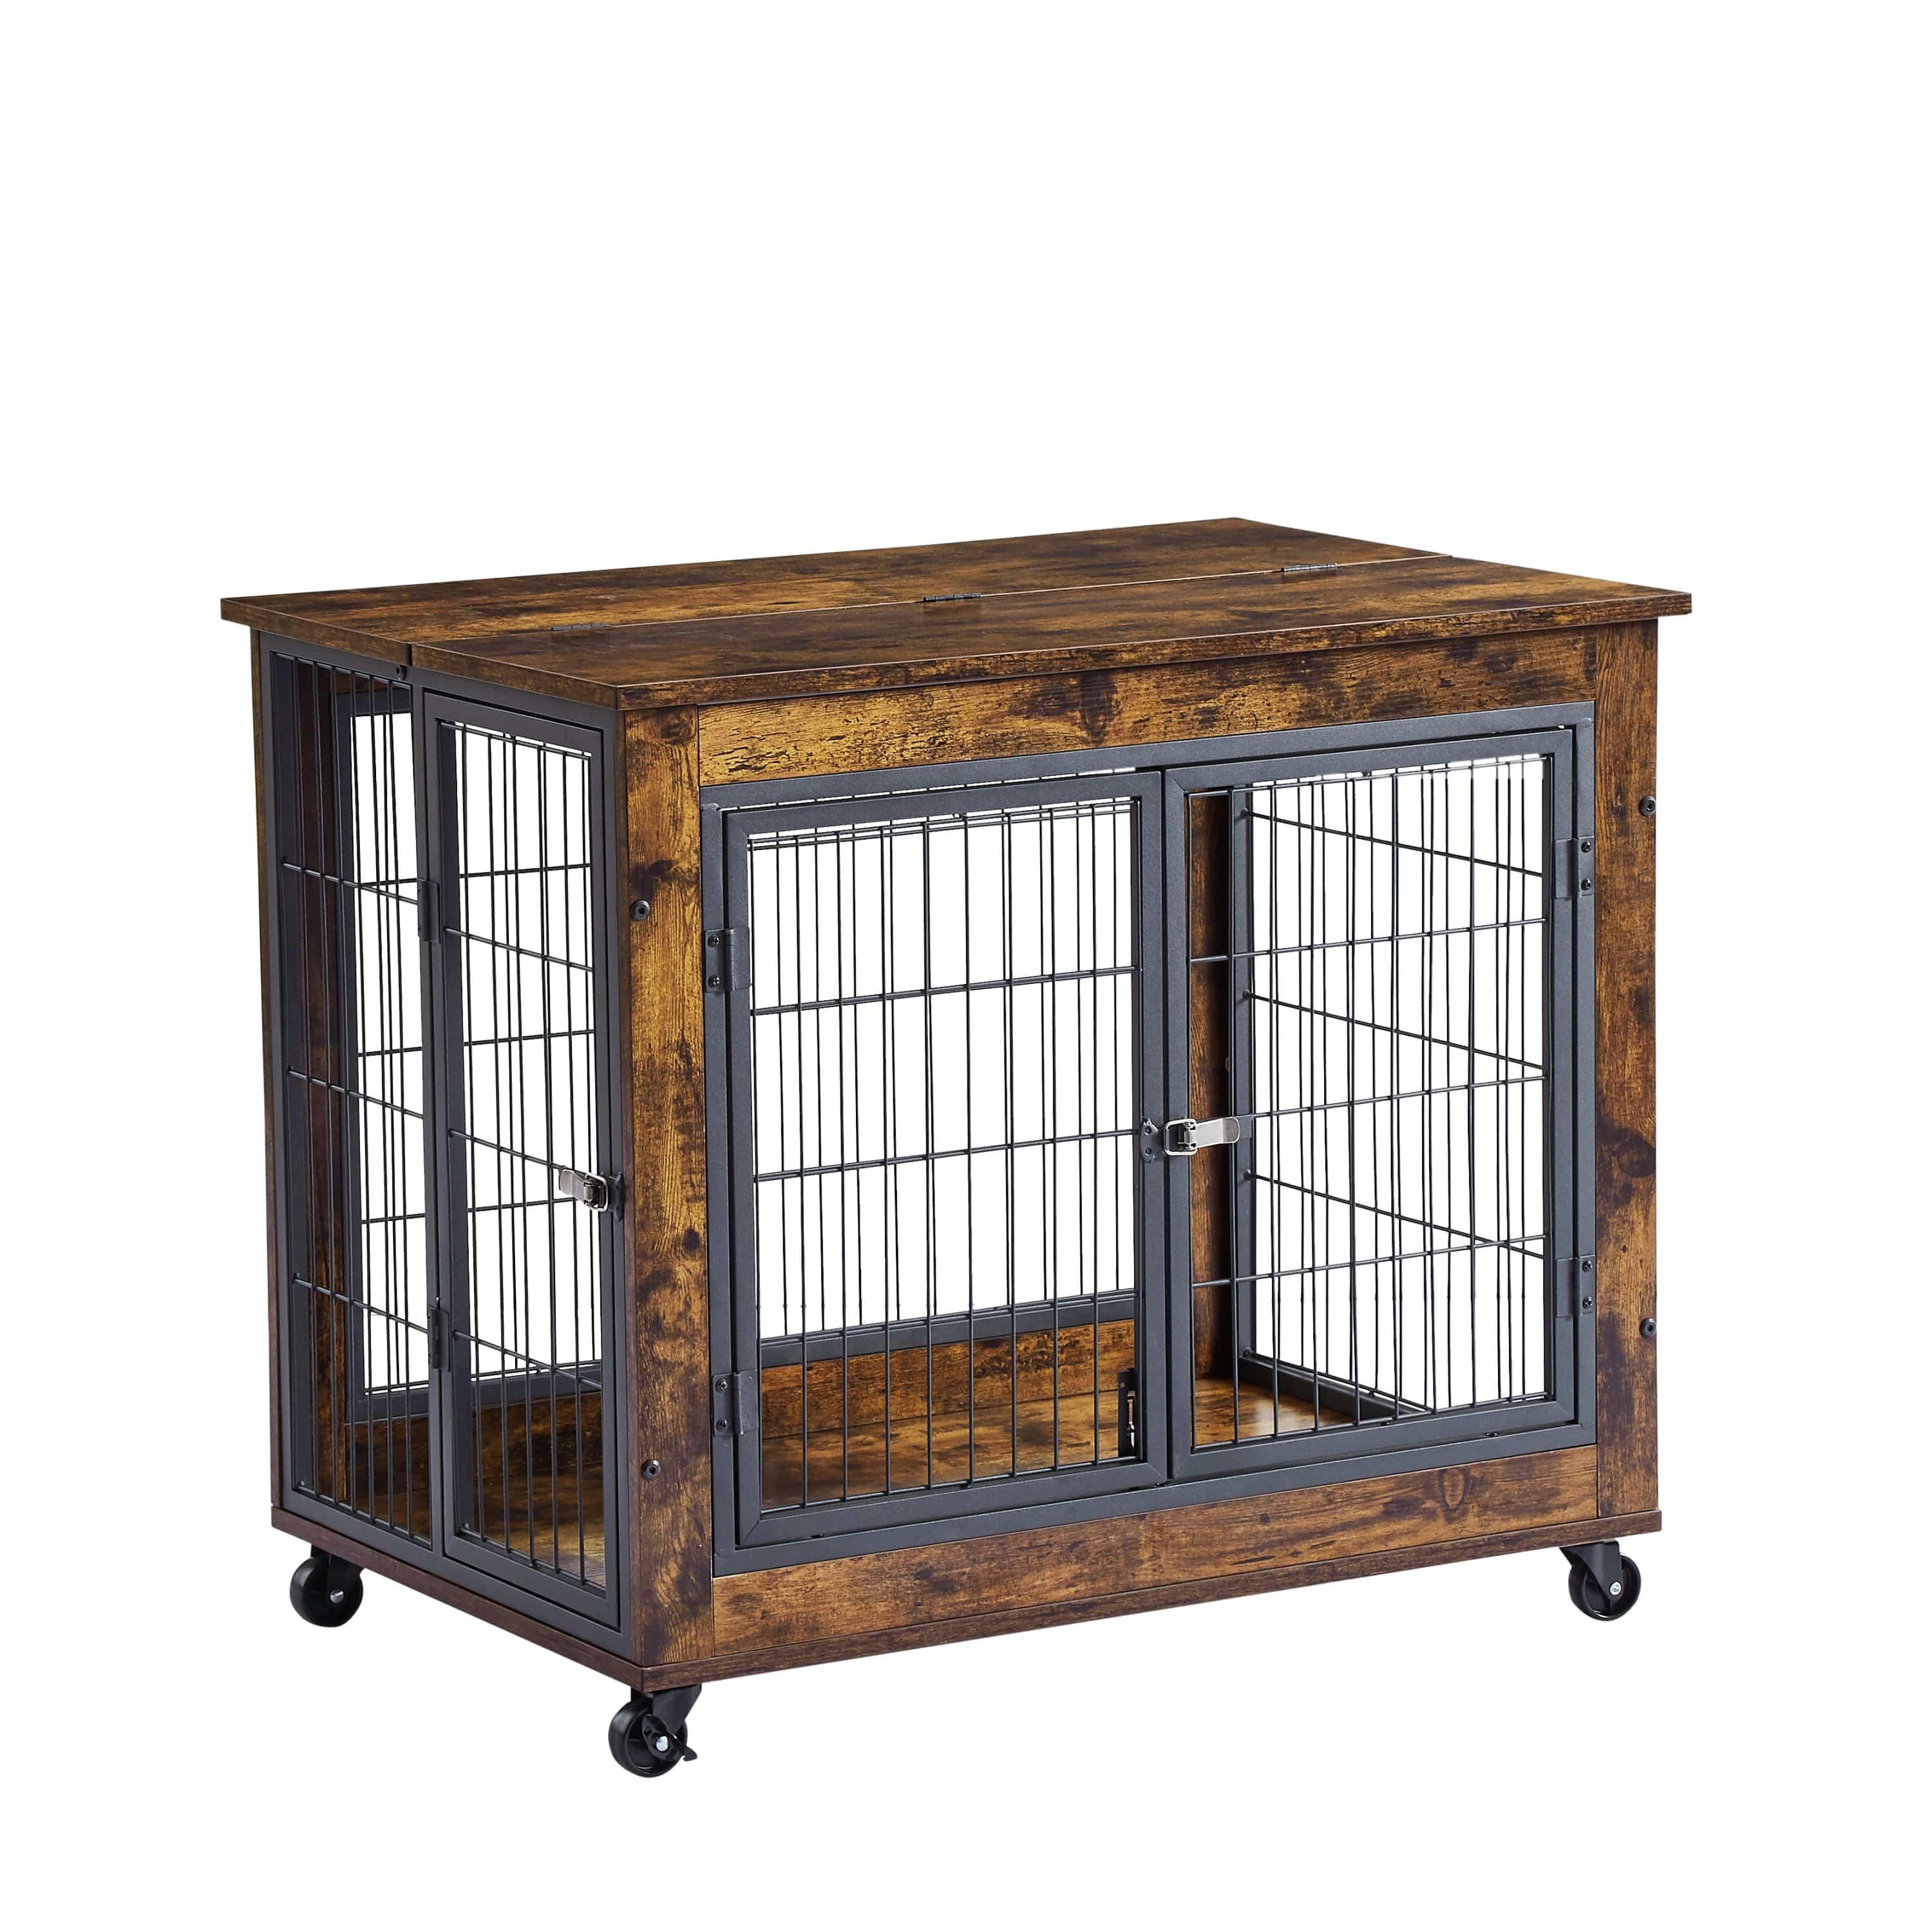 Shop JHX Furniture Dog Cage Crate with Double Doors on Casters（Rustic Brown,31.50''W*22.05''D*24.8''H） Mademoiselle Home Decor